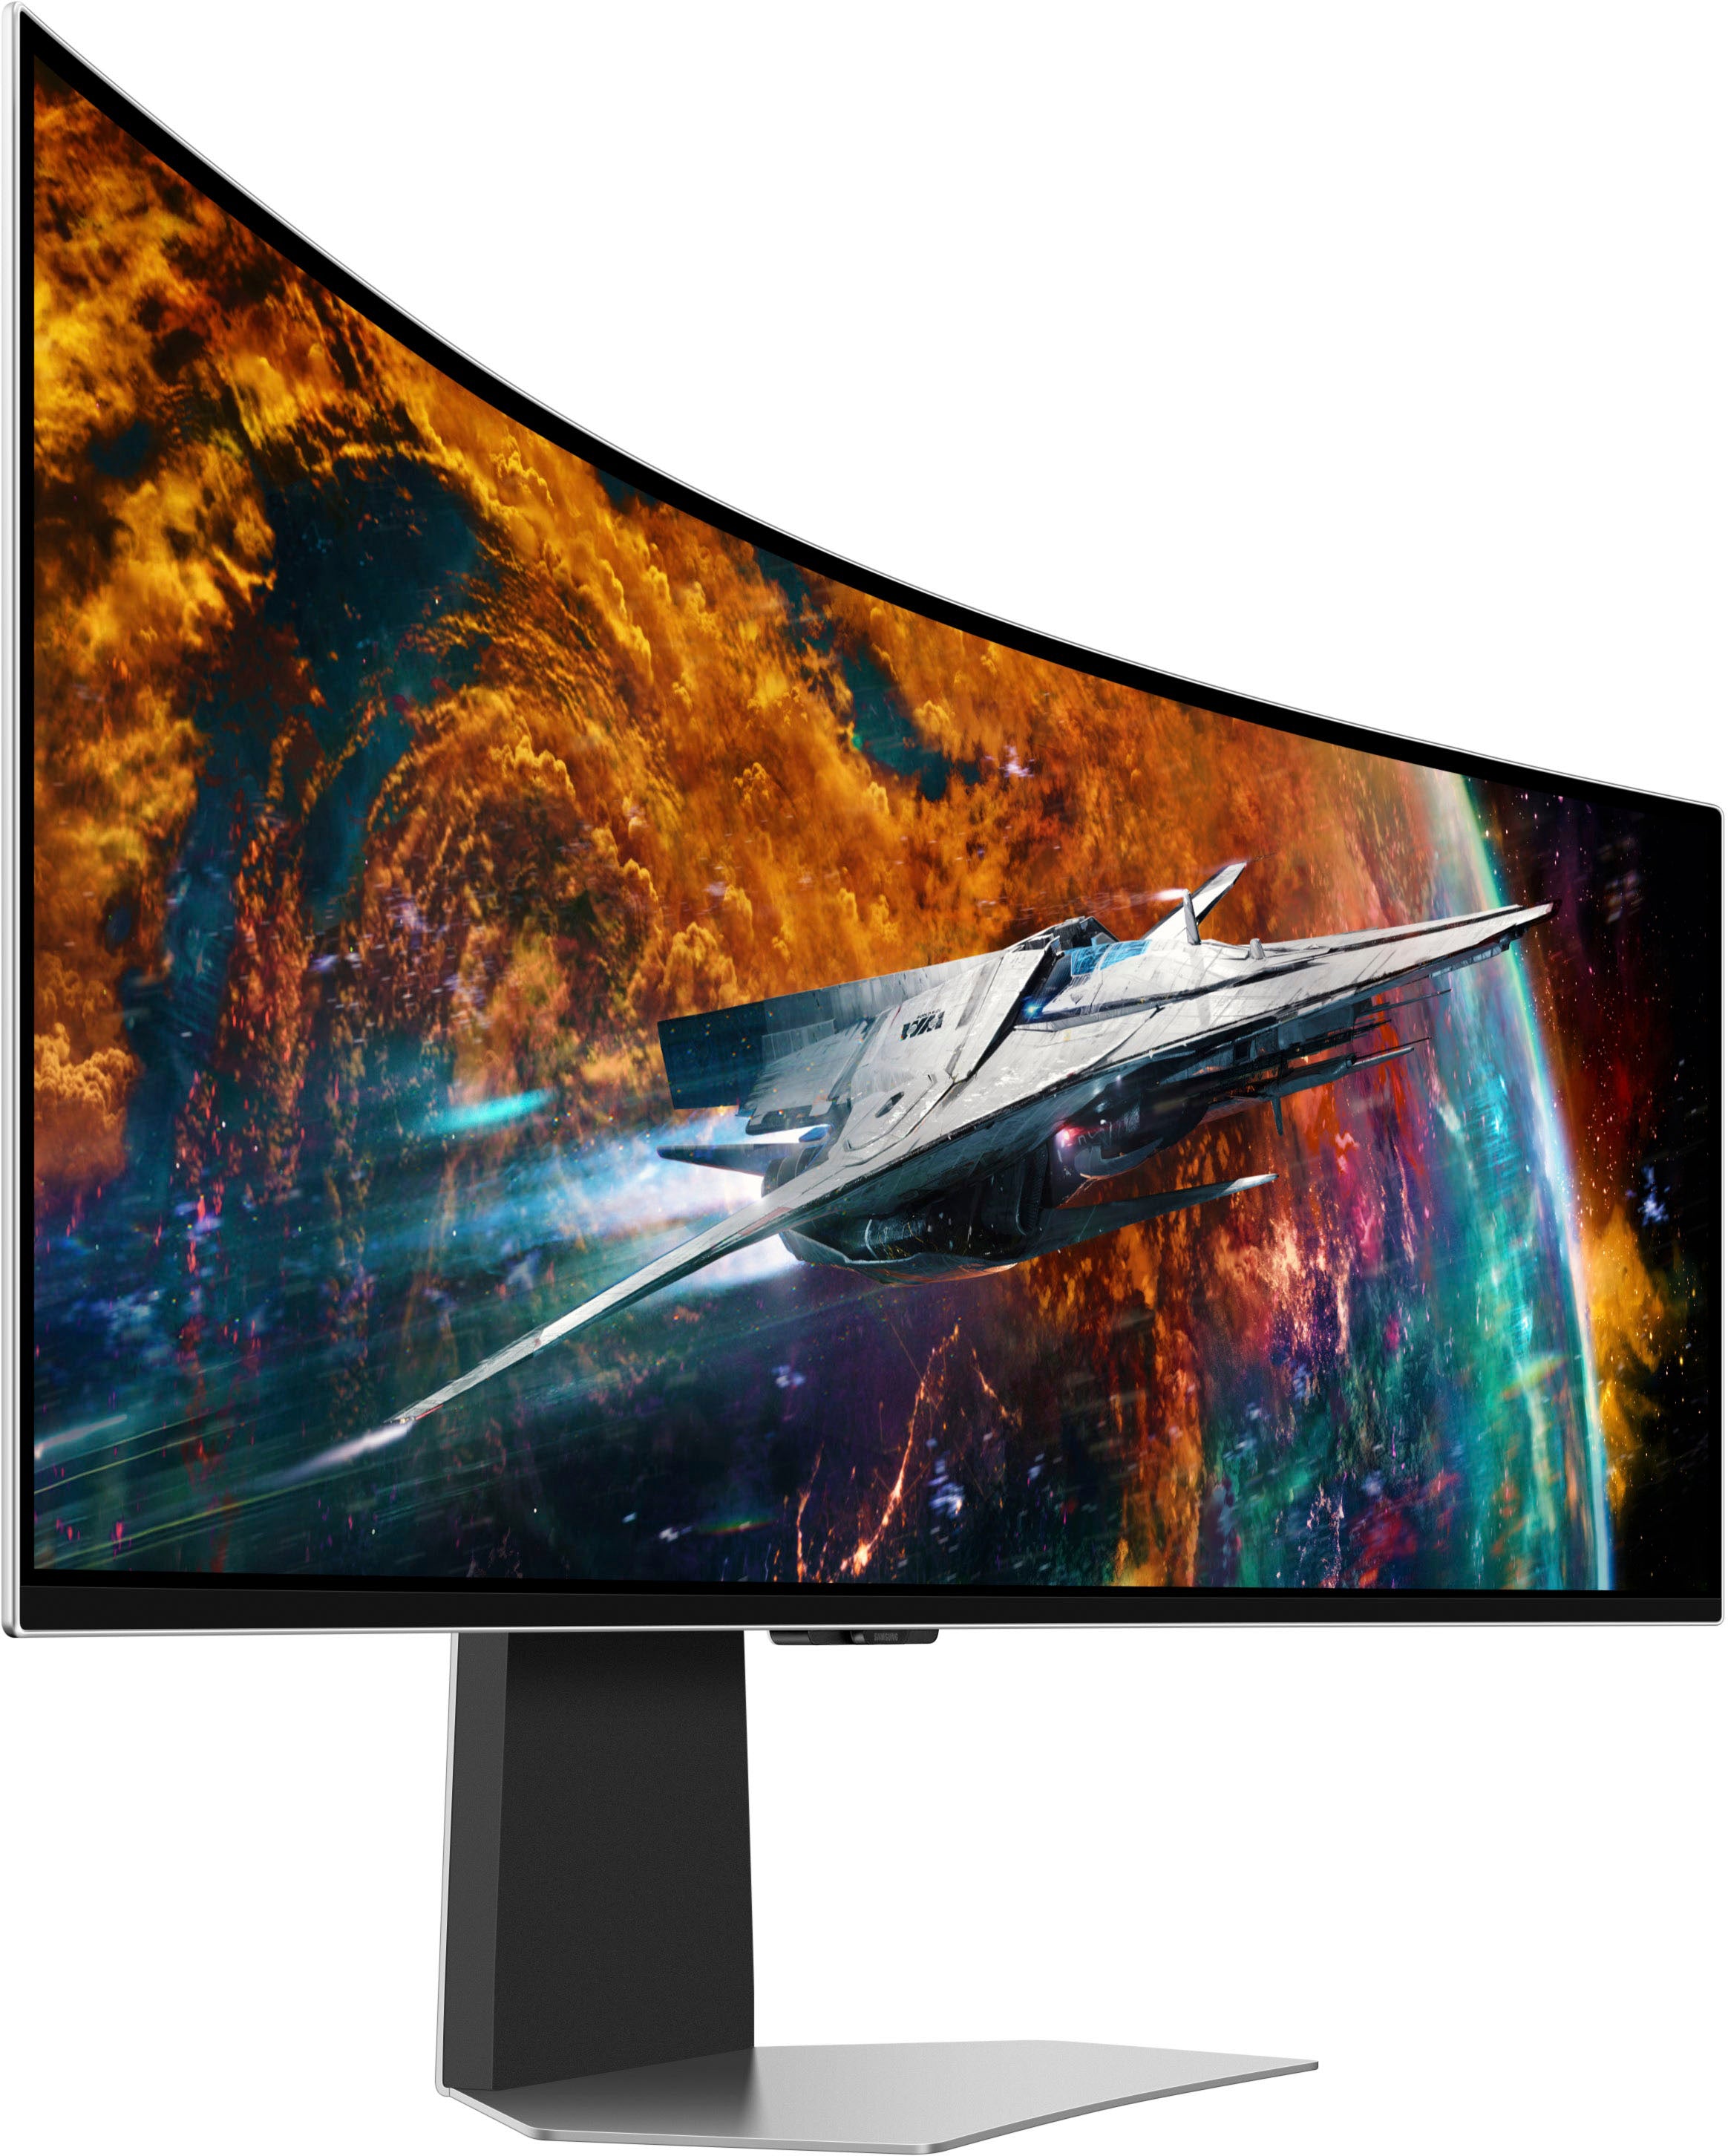 Samsung - Odyssey OLED G9 49" Curved Dual QHD 240Hz 0.03ms Gaming Monitor - Silver - $975